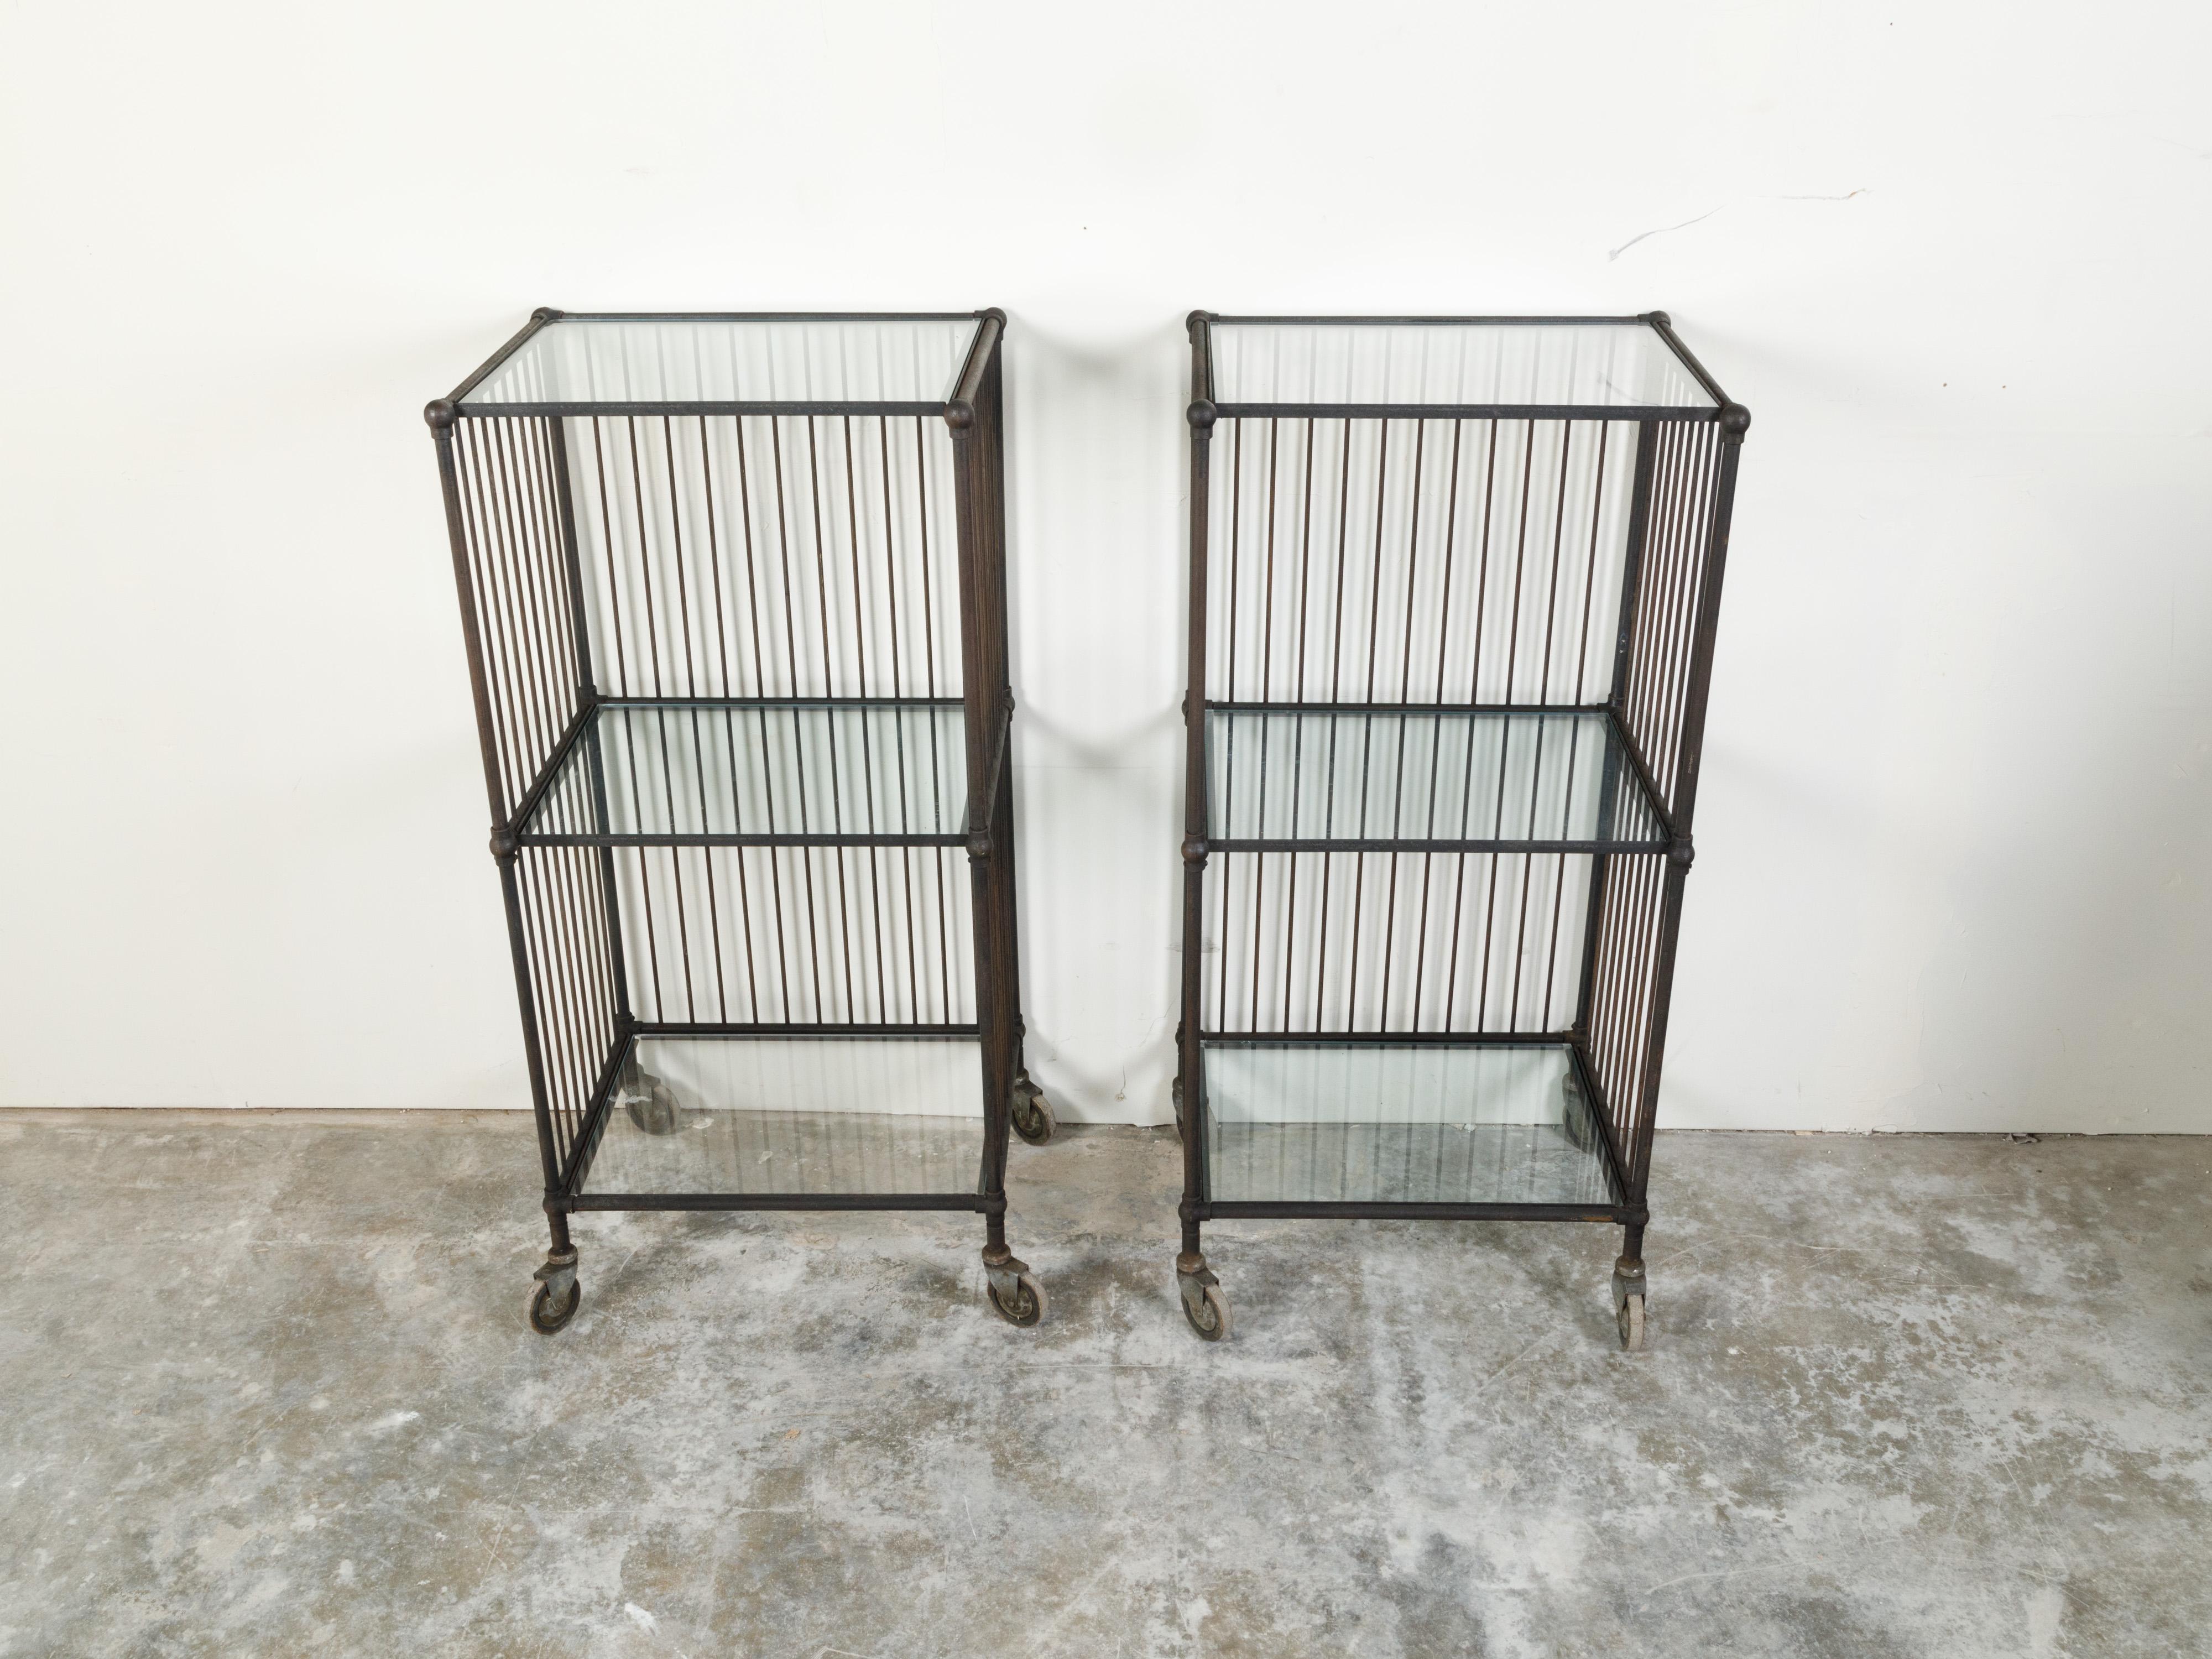 Metal Vintage Industrial Carts with Glass Shelves and Casters, Sold Individually For Sale